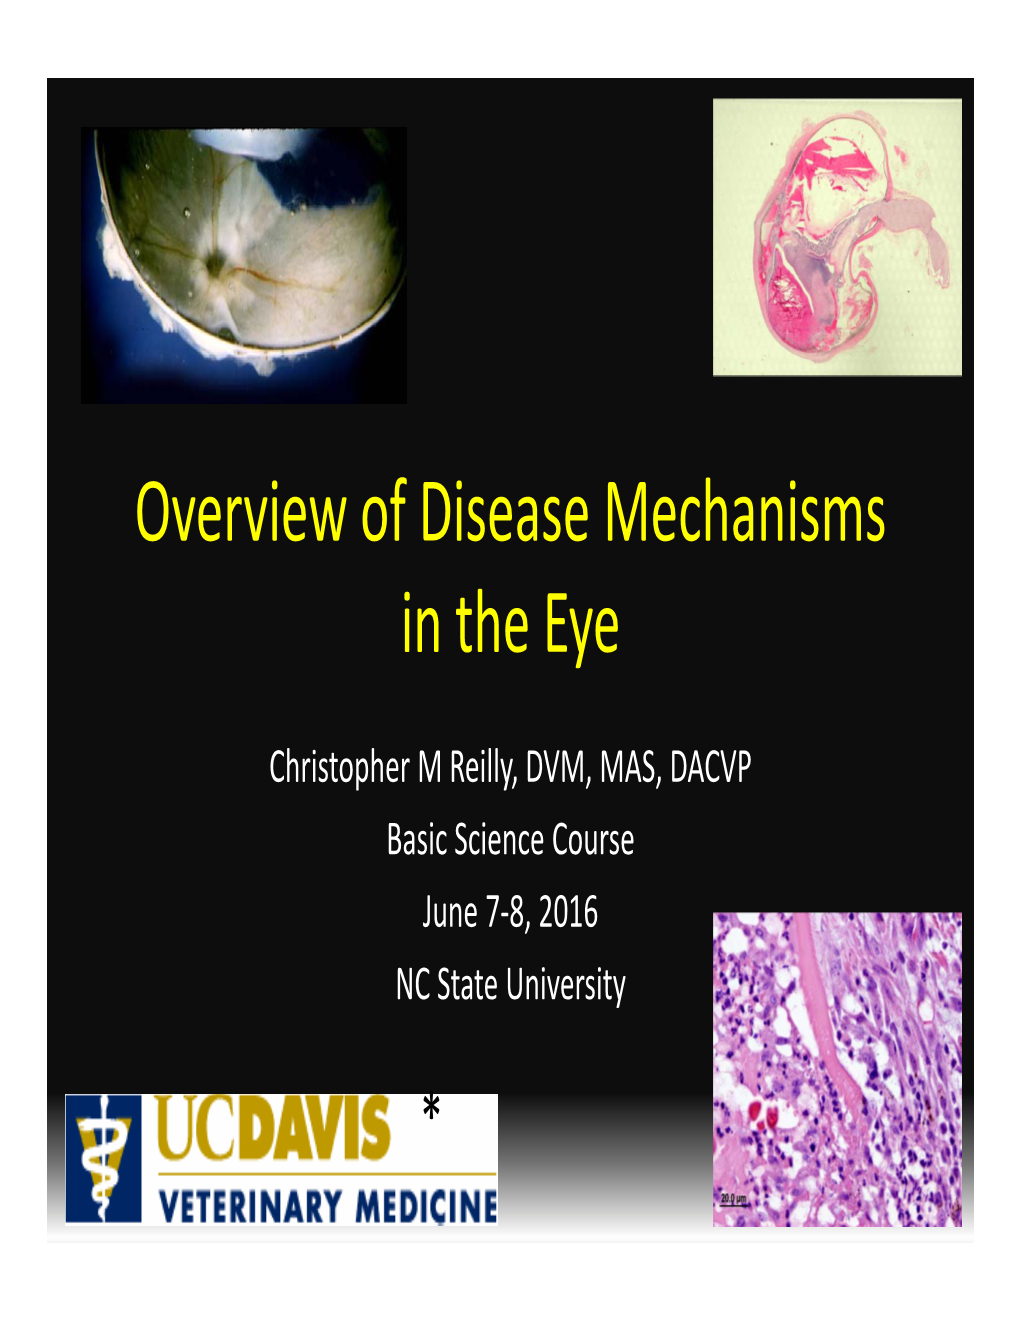 Overview of Disease Mechanisms in the Eye